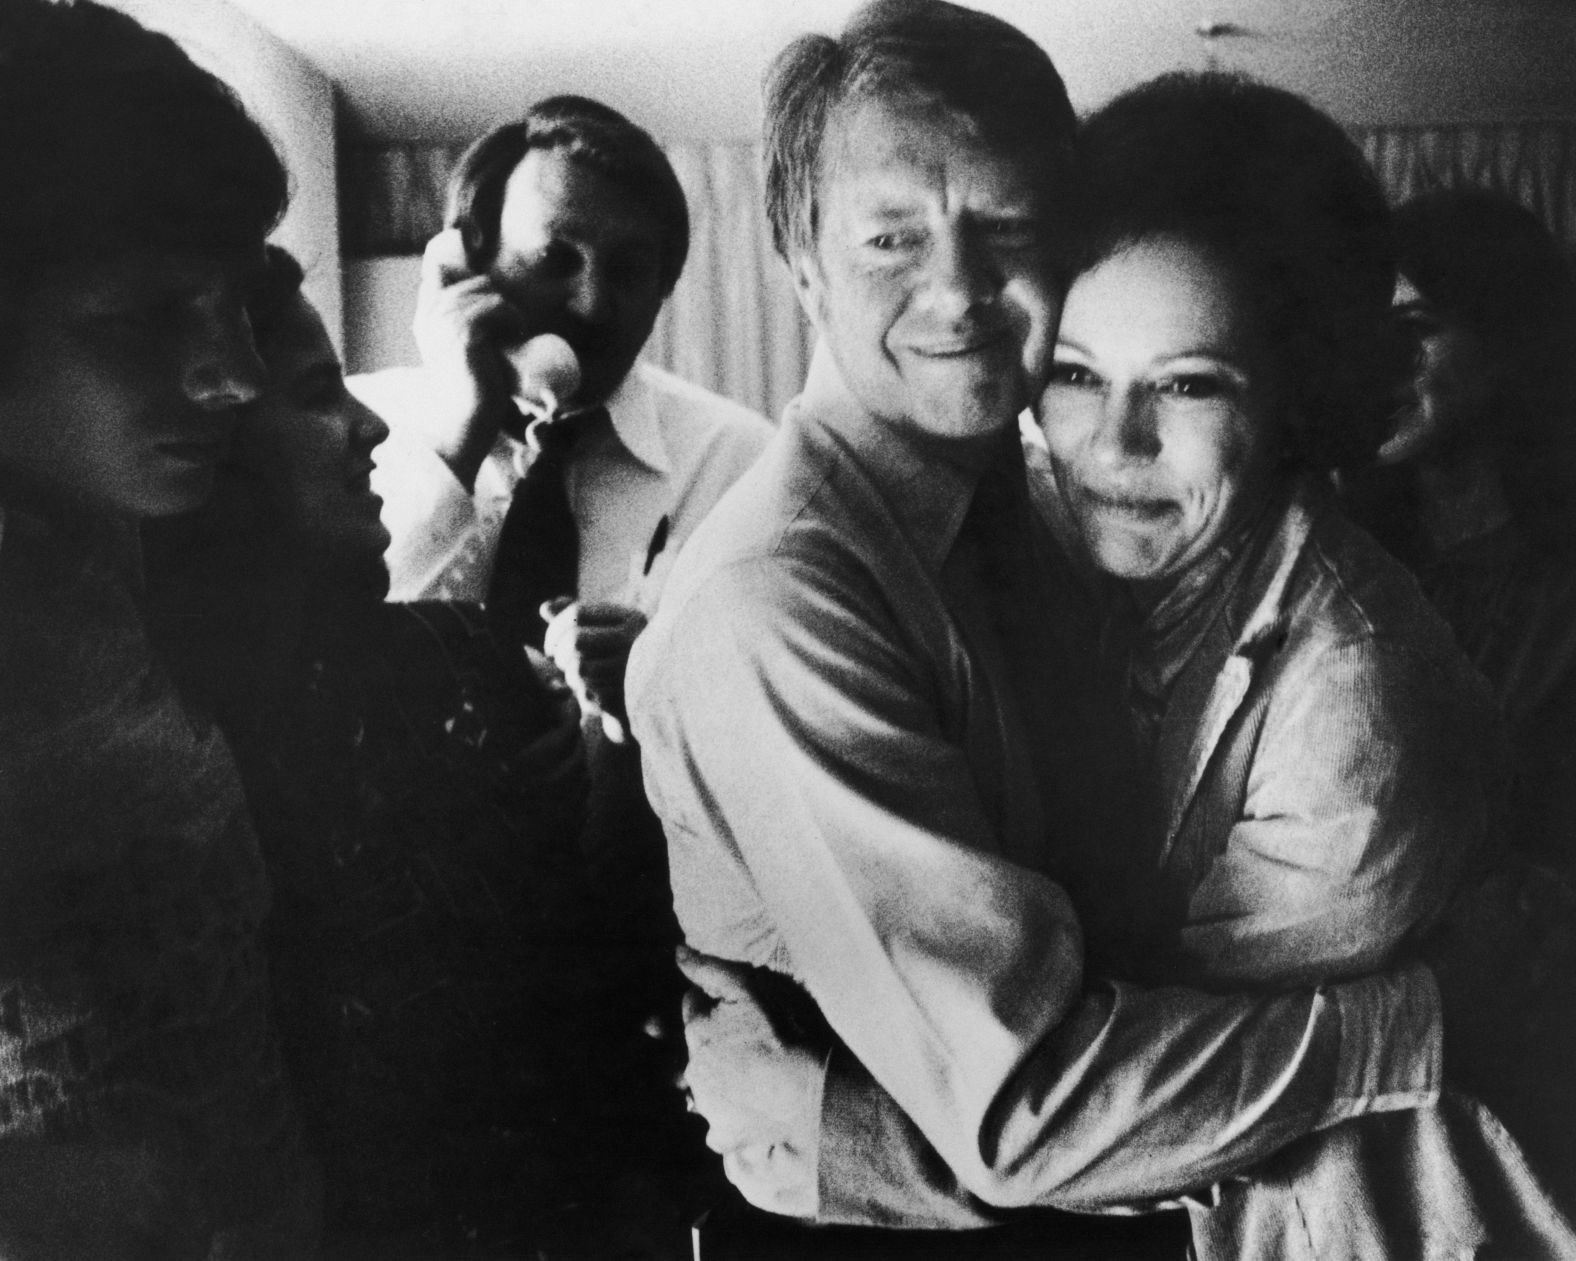 The Carters embrace after receiving news that Jimmy had won the presidential election in November 1976.